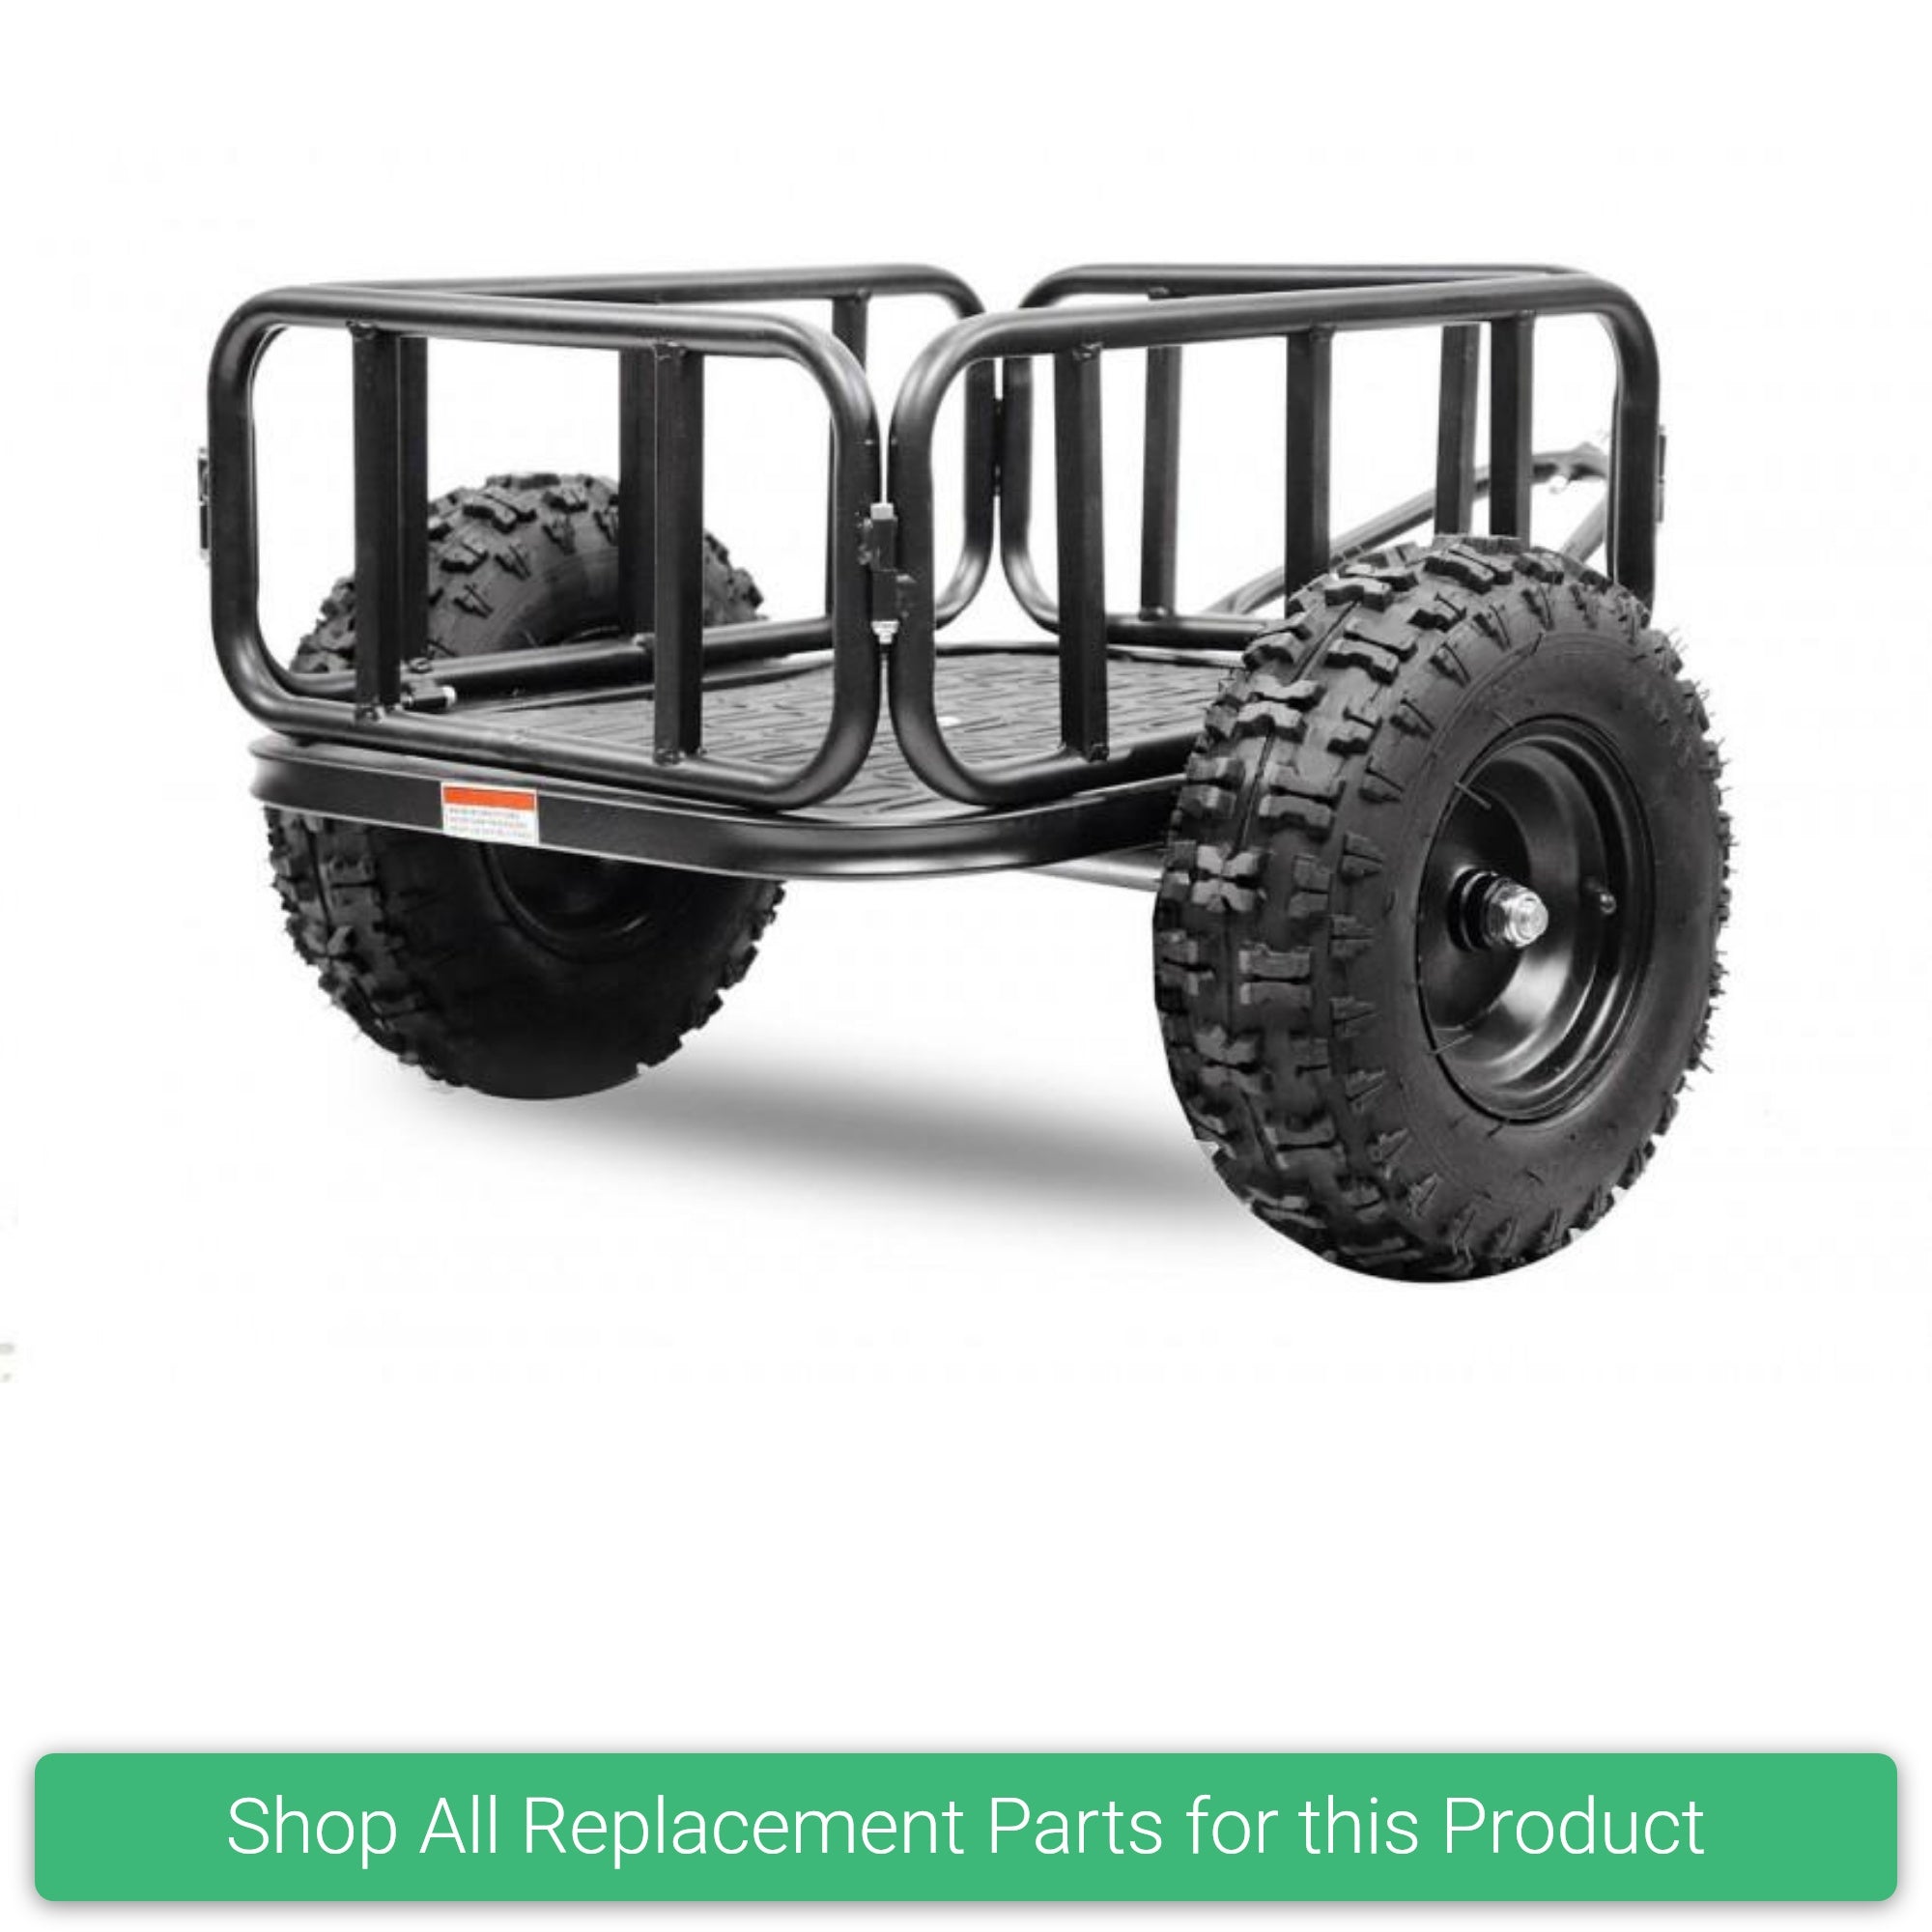 Replacement Parts and Spares for Kids Mini ATV Trailer - OneQuad™ | PX2S Compatible - OneQuad-PX2S-ADDON-Black - Mini Trailer For ATV